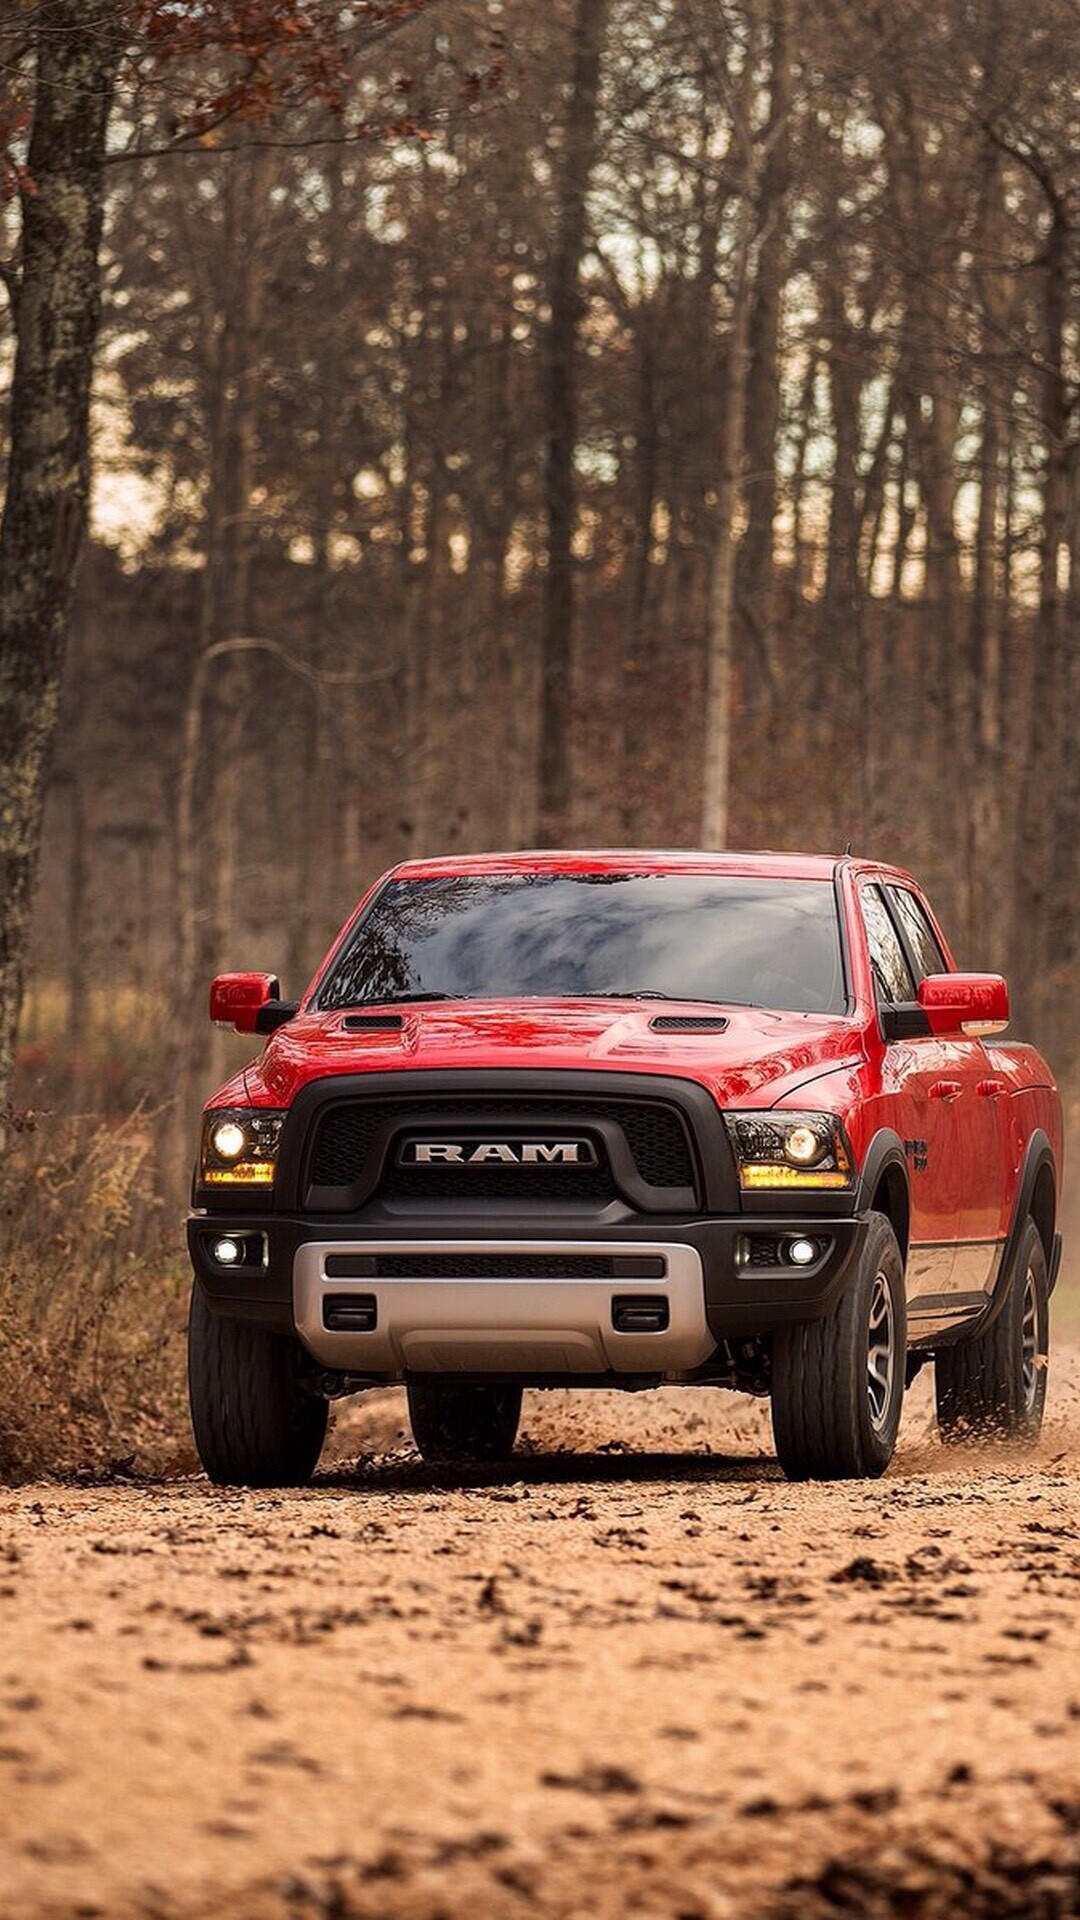 Phone Dodge Ram wallpapers, Proud owners, Truck enthusiasts, 1080x1920 Full HD Phone